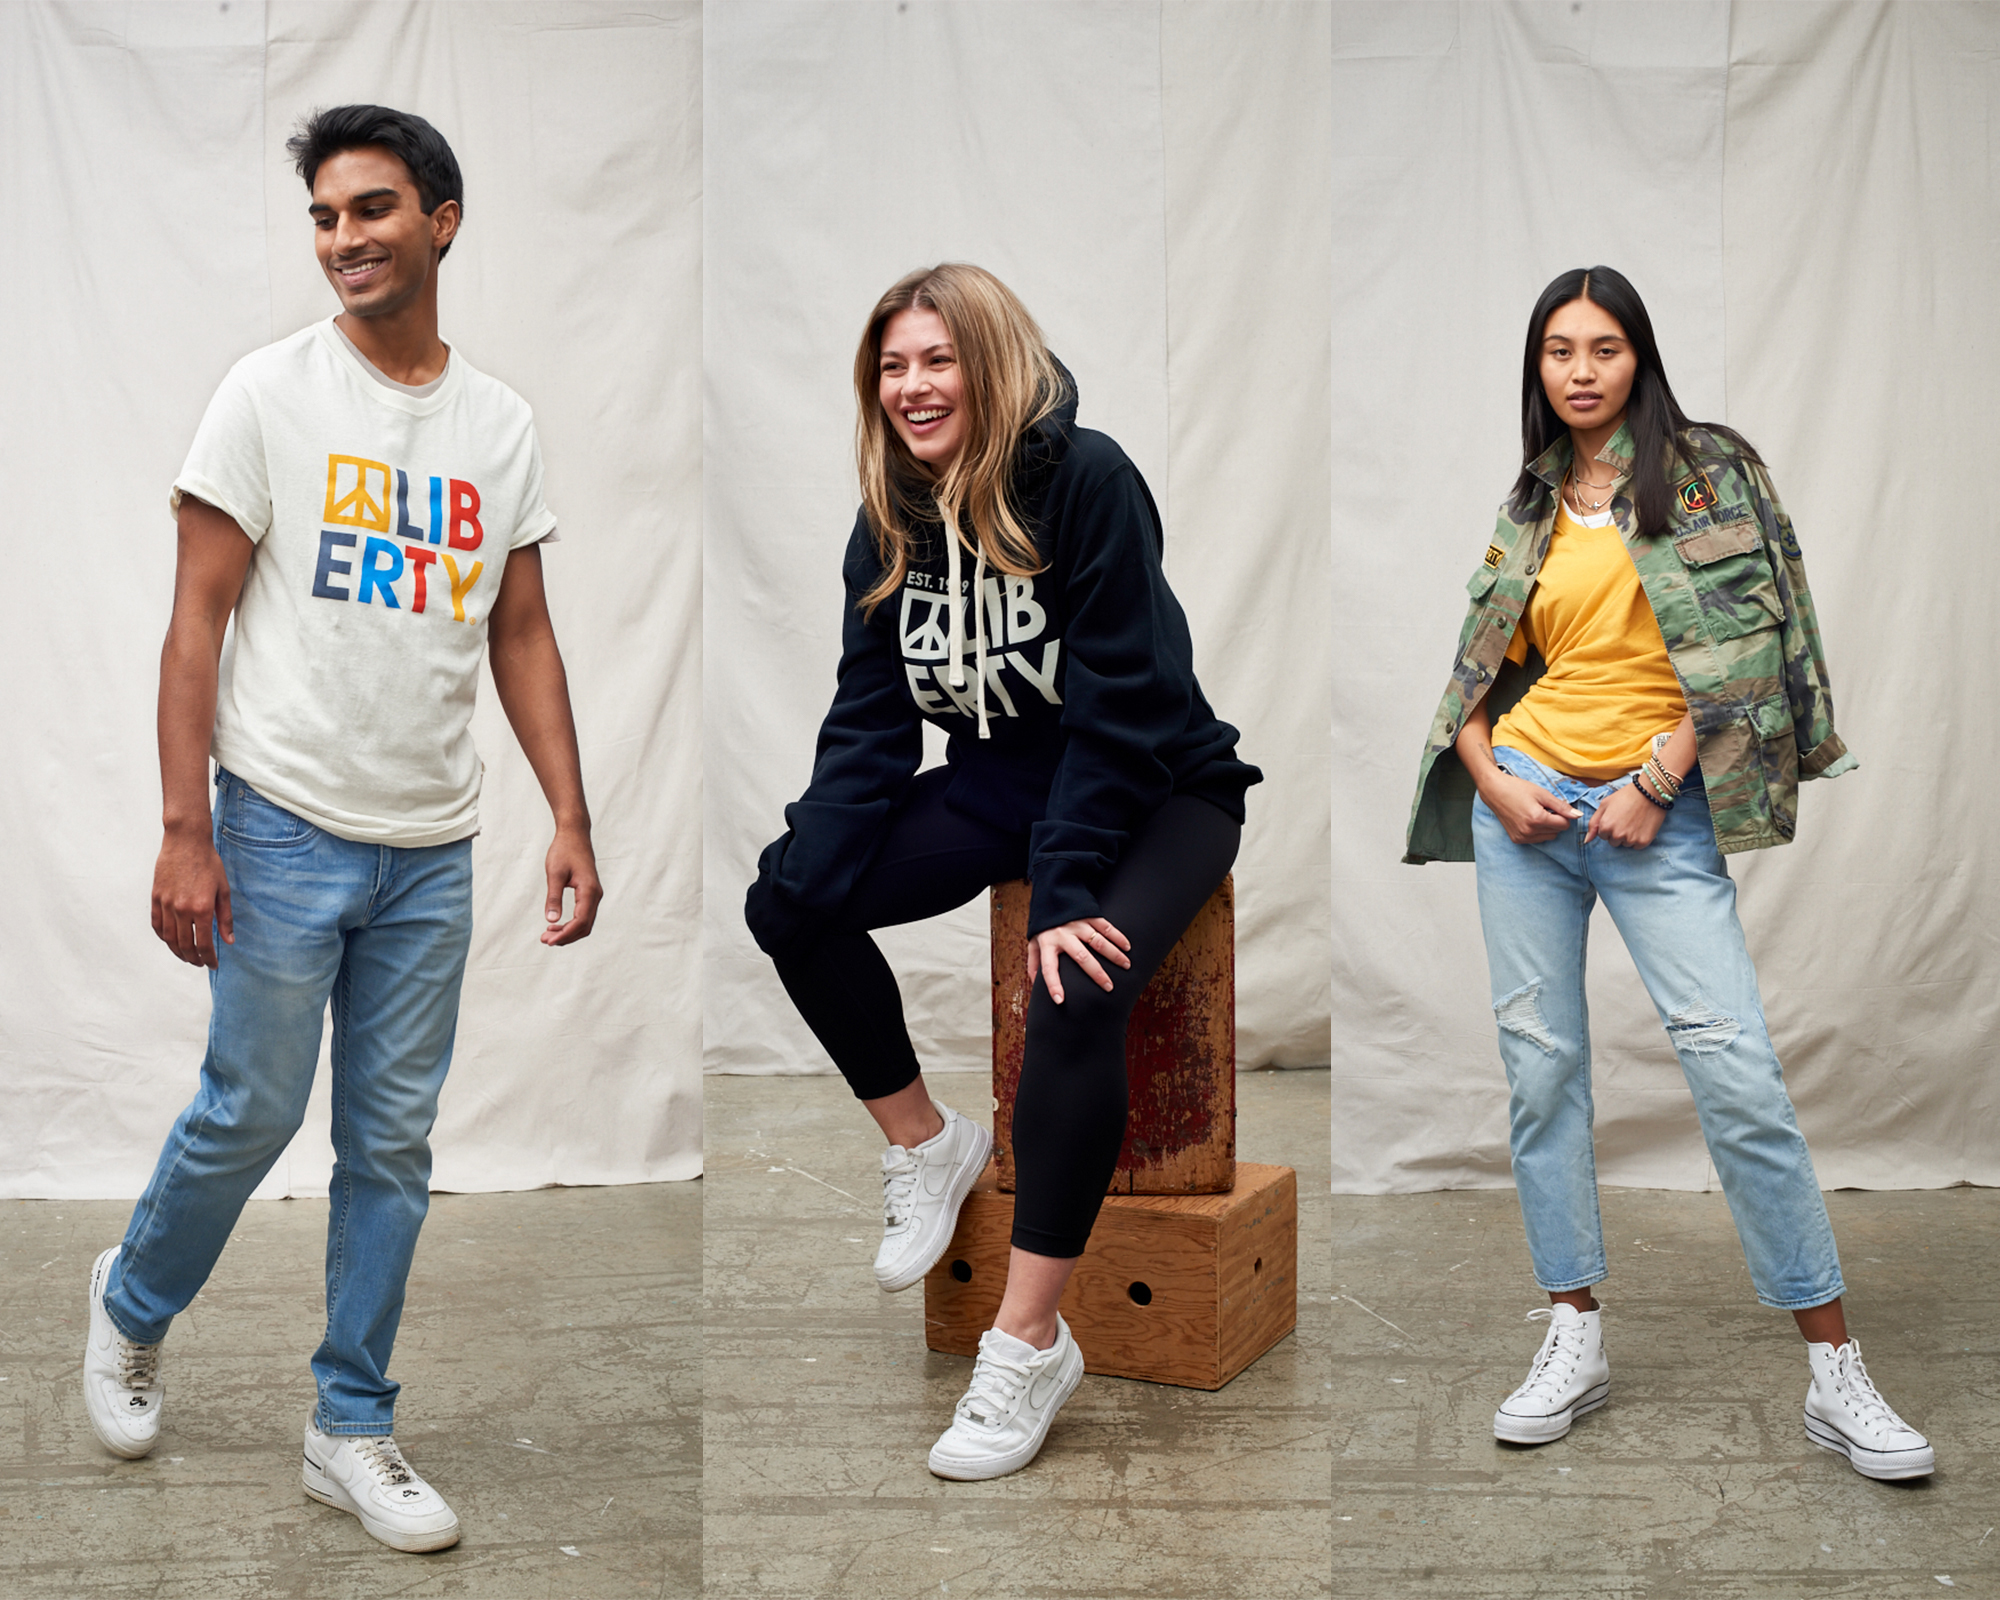 From Camp Apparel to Everyday Wear, Liberty Clothing Enters Consumer Market